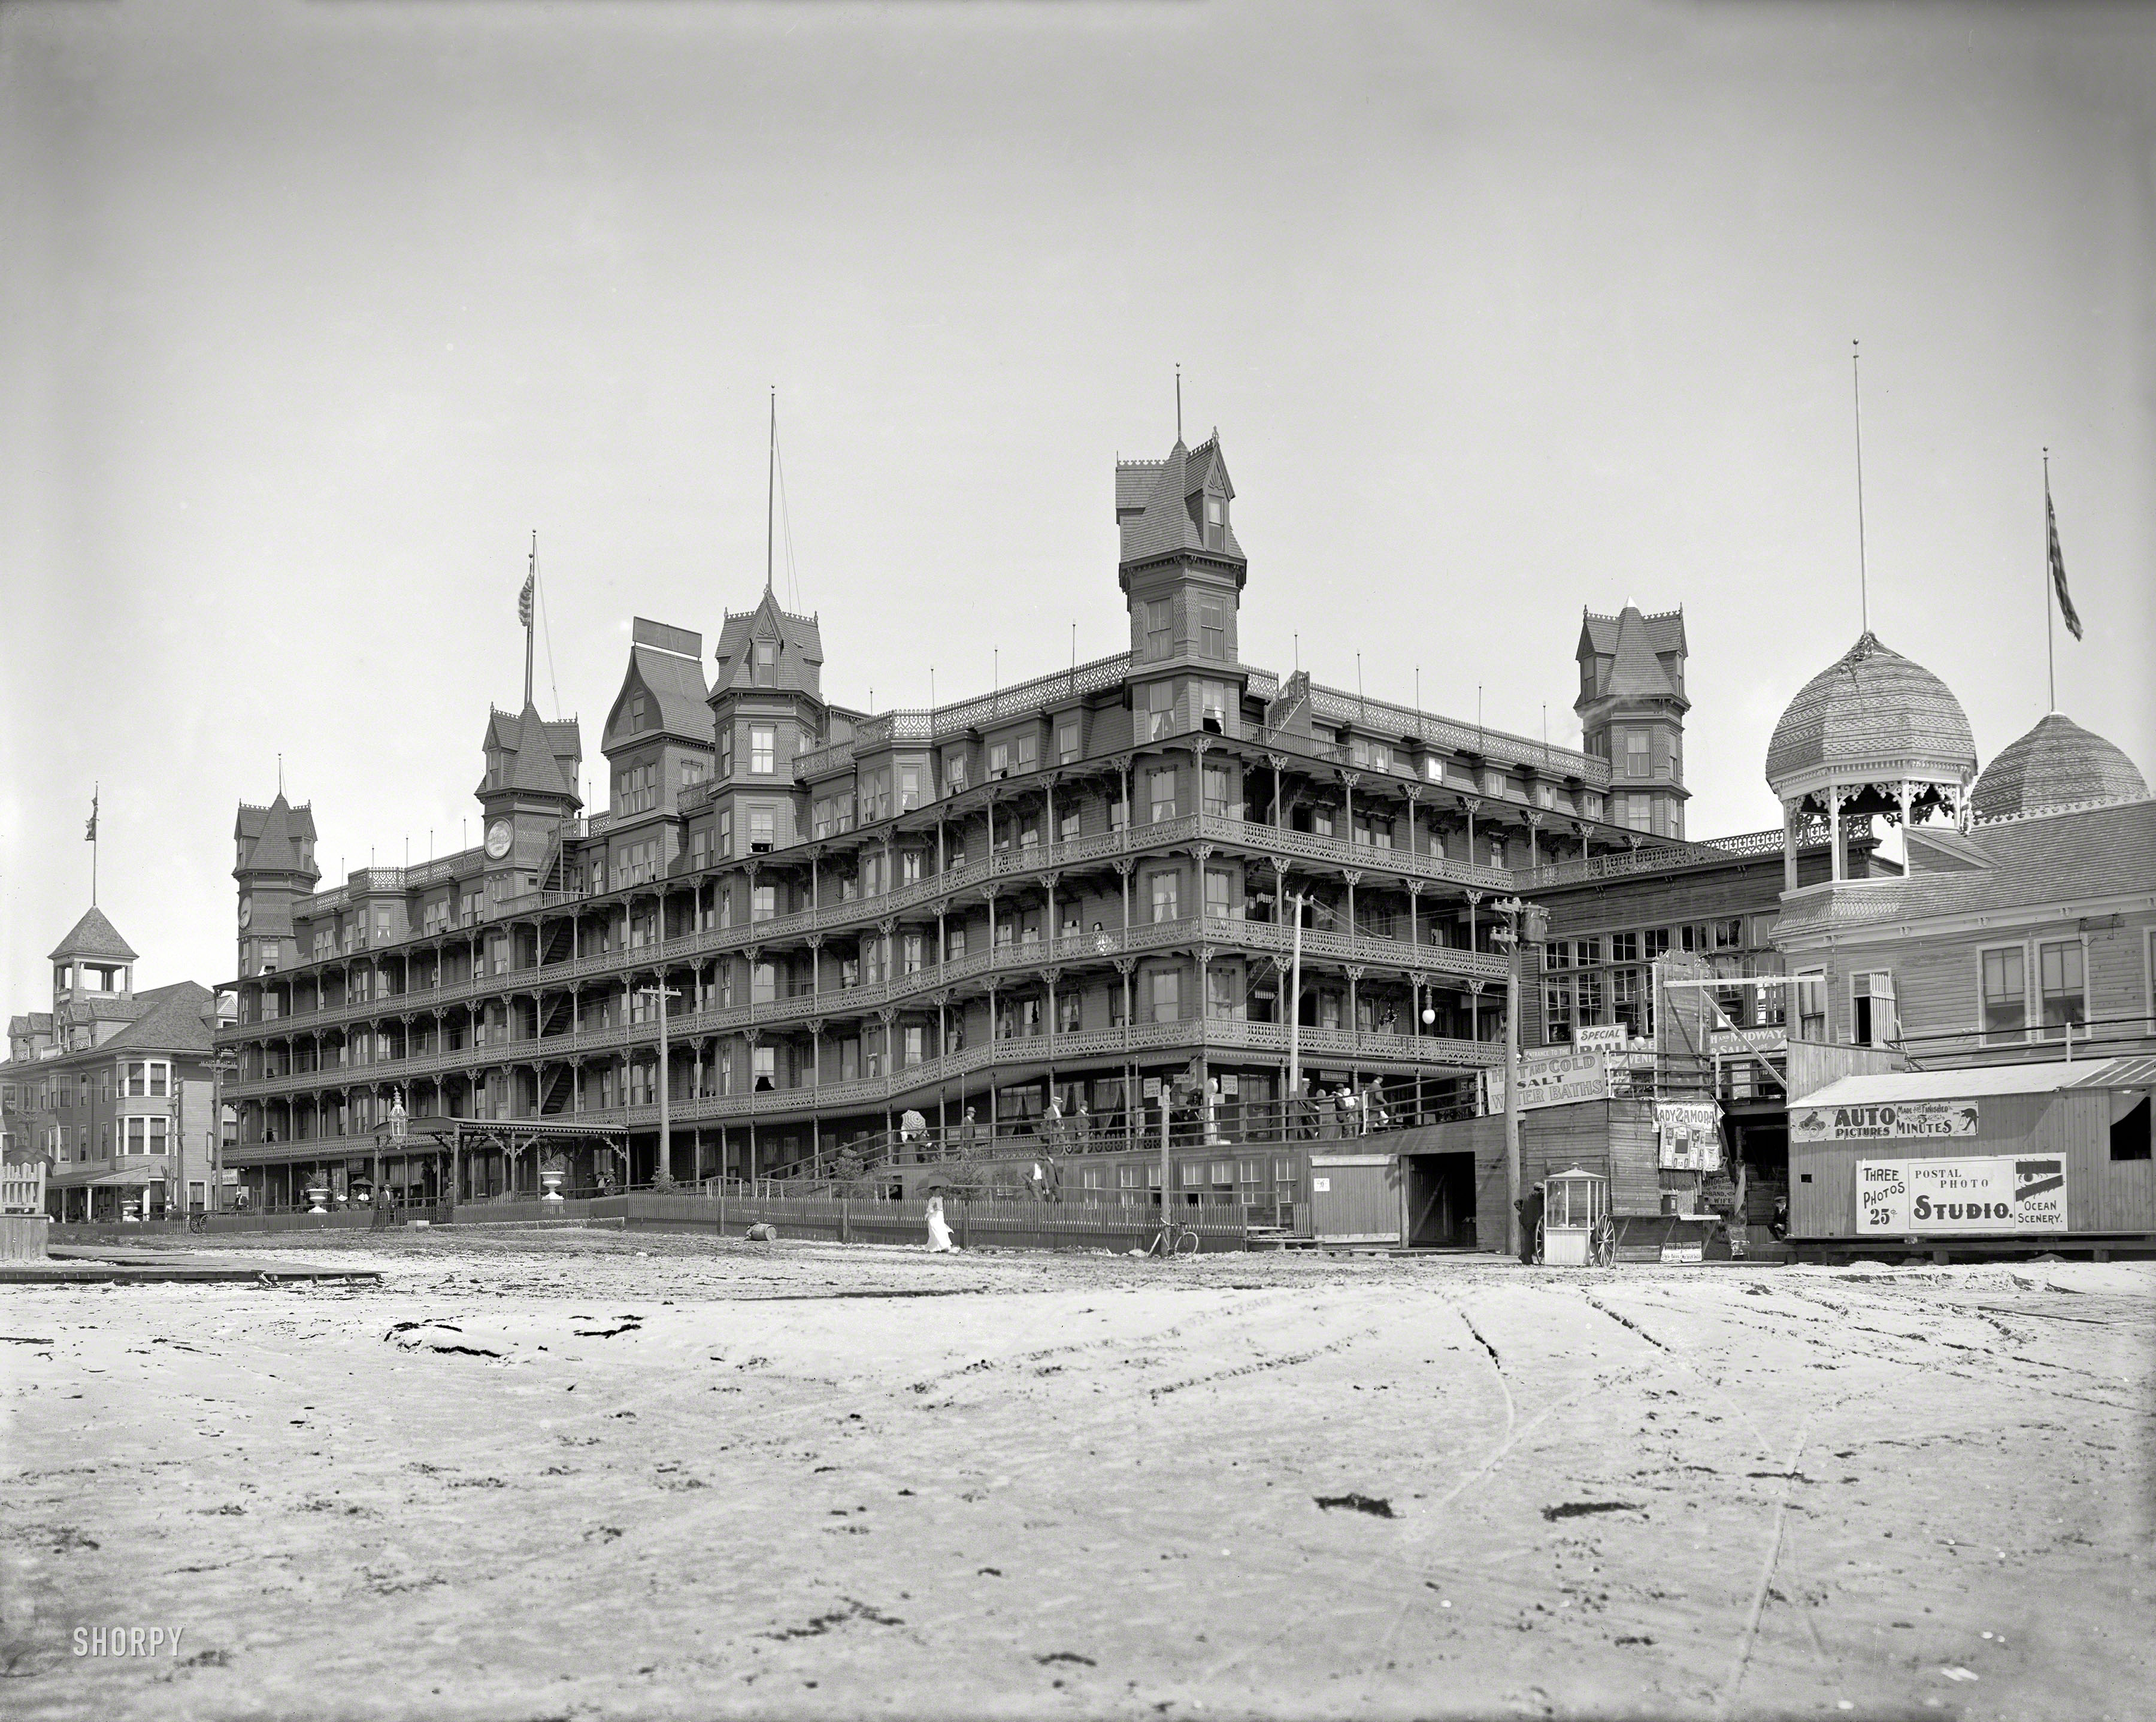 Old Orchard, Maine, circa 1904. "Hotel Velvet from beach." Note photo studio signage at right. Renamed the Hotel Emerson, the place "burned like oil" in the Great Fire of 1907. 8x10 glass negative, Detroit Publishing Co. View full size.